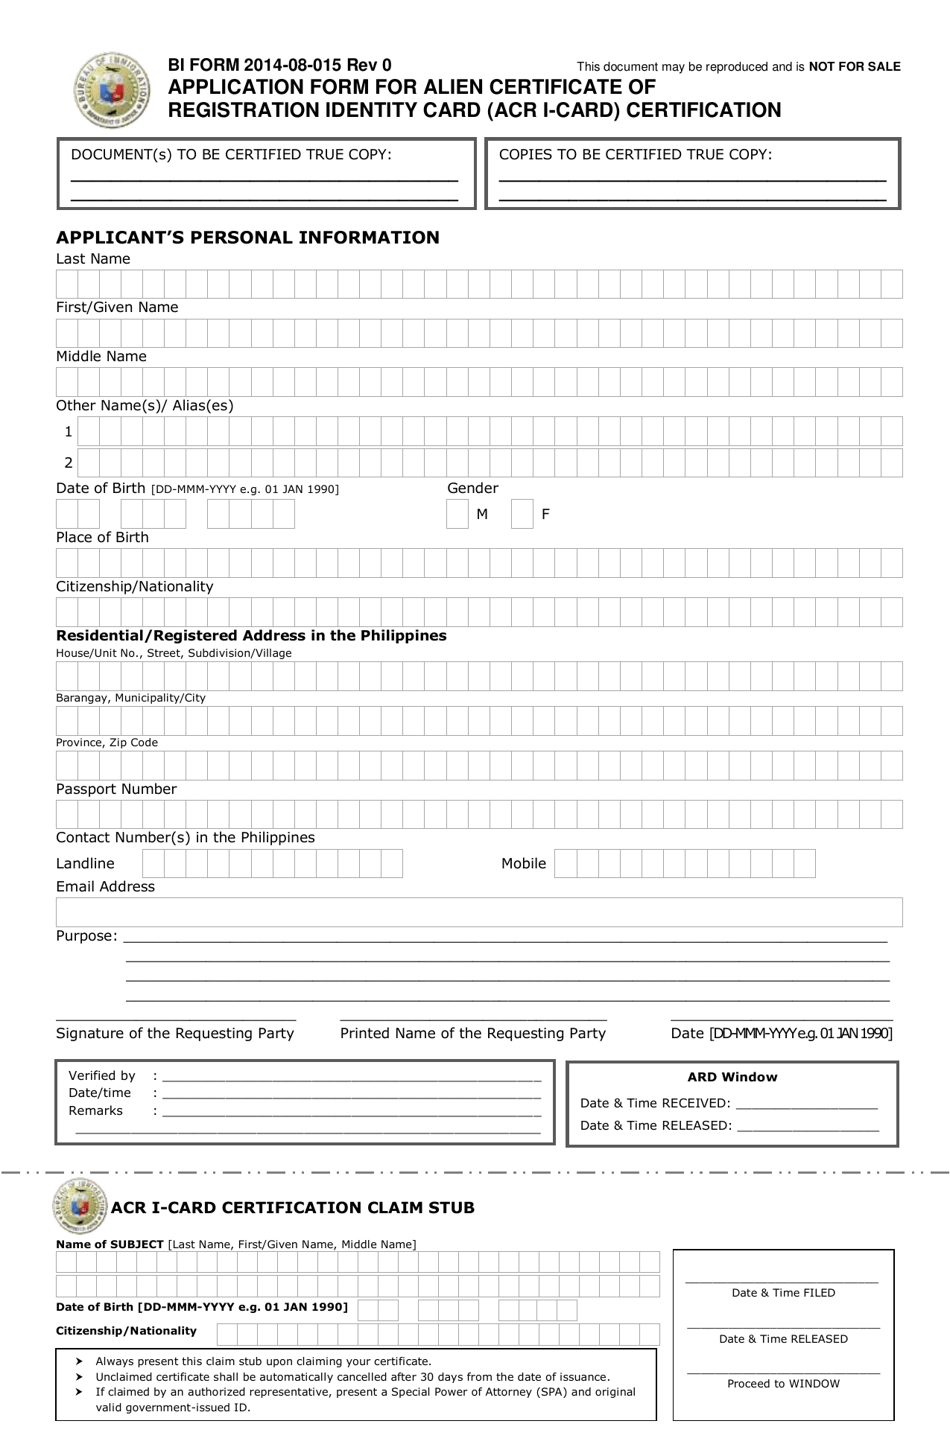 BI Form 2014-08-015 Application Form for Alien Certificate of Registration Identity Card (Acr I-Card) Certification - Philippines, Page 1